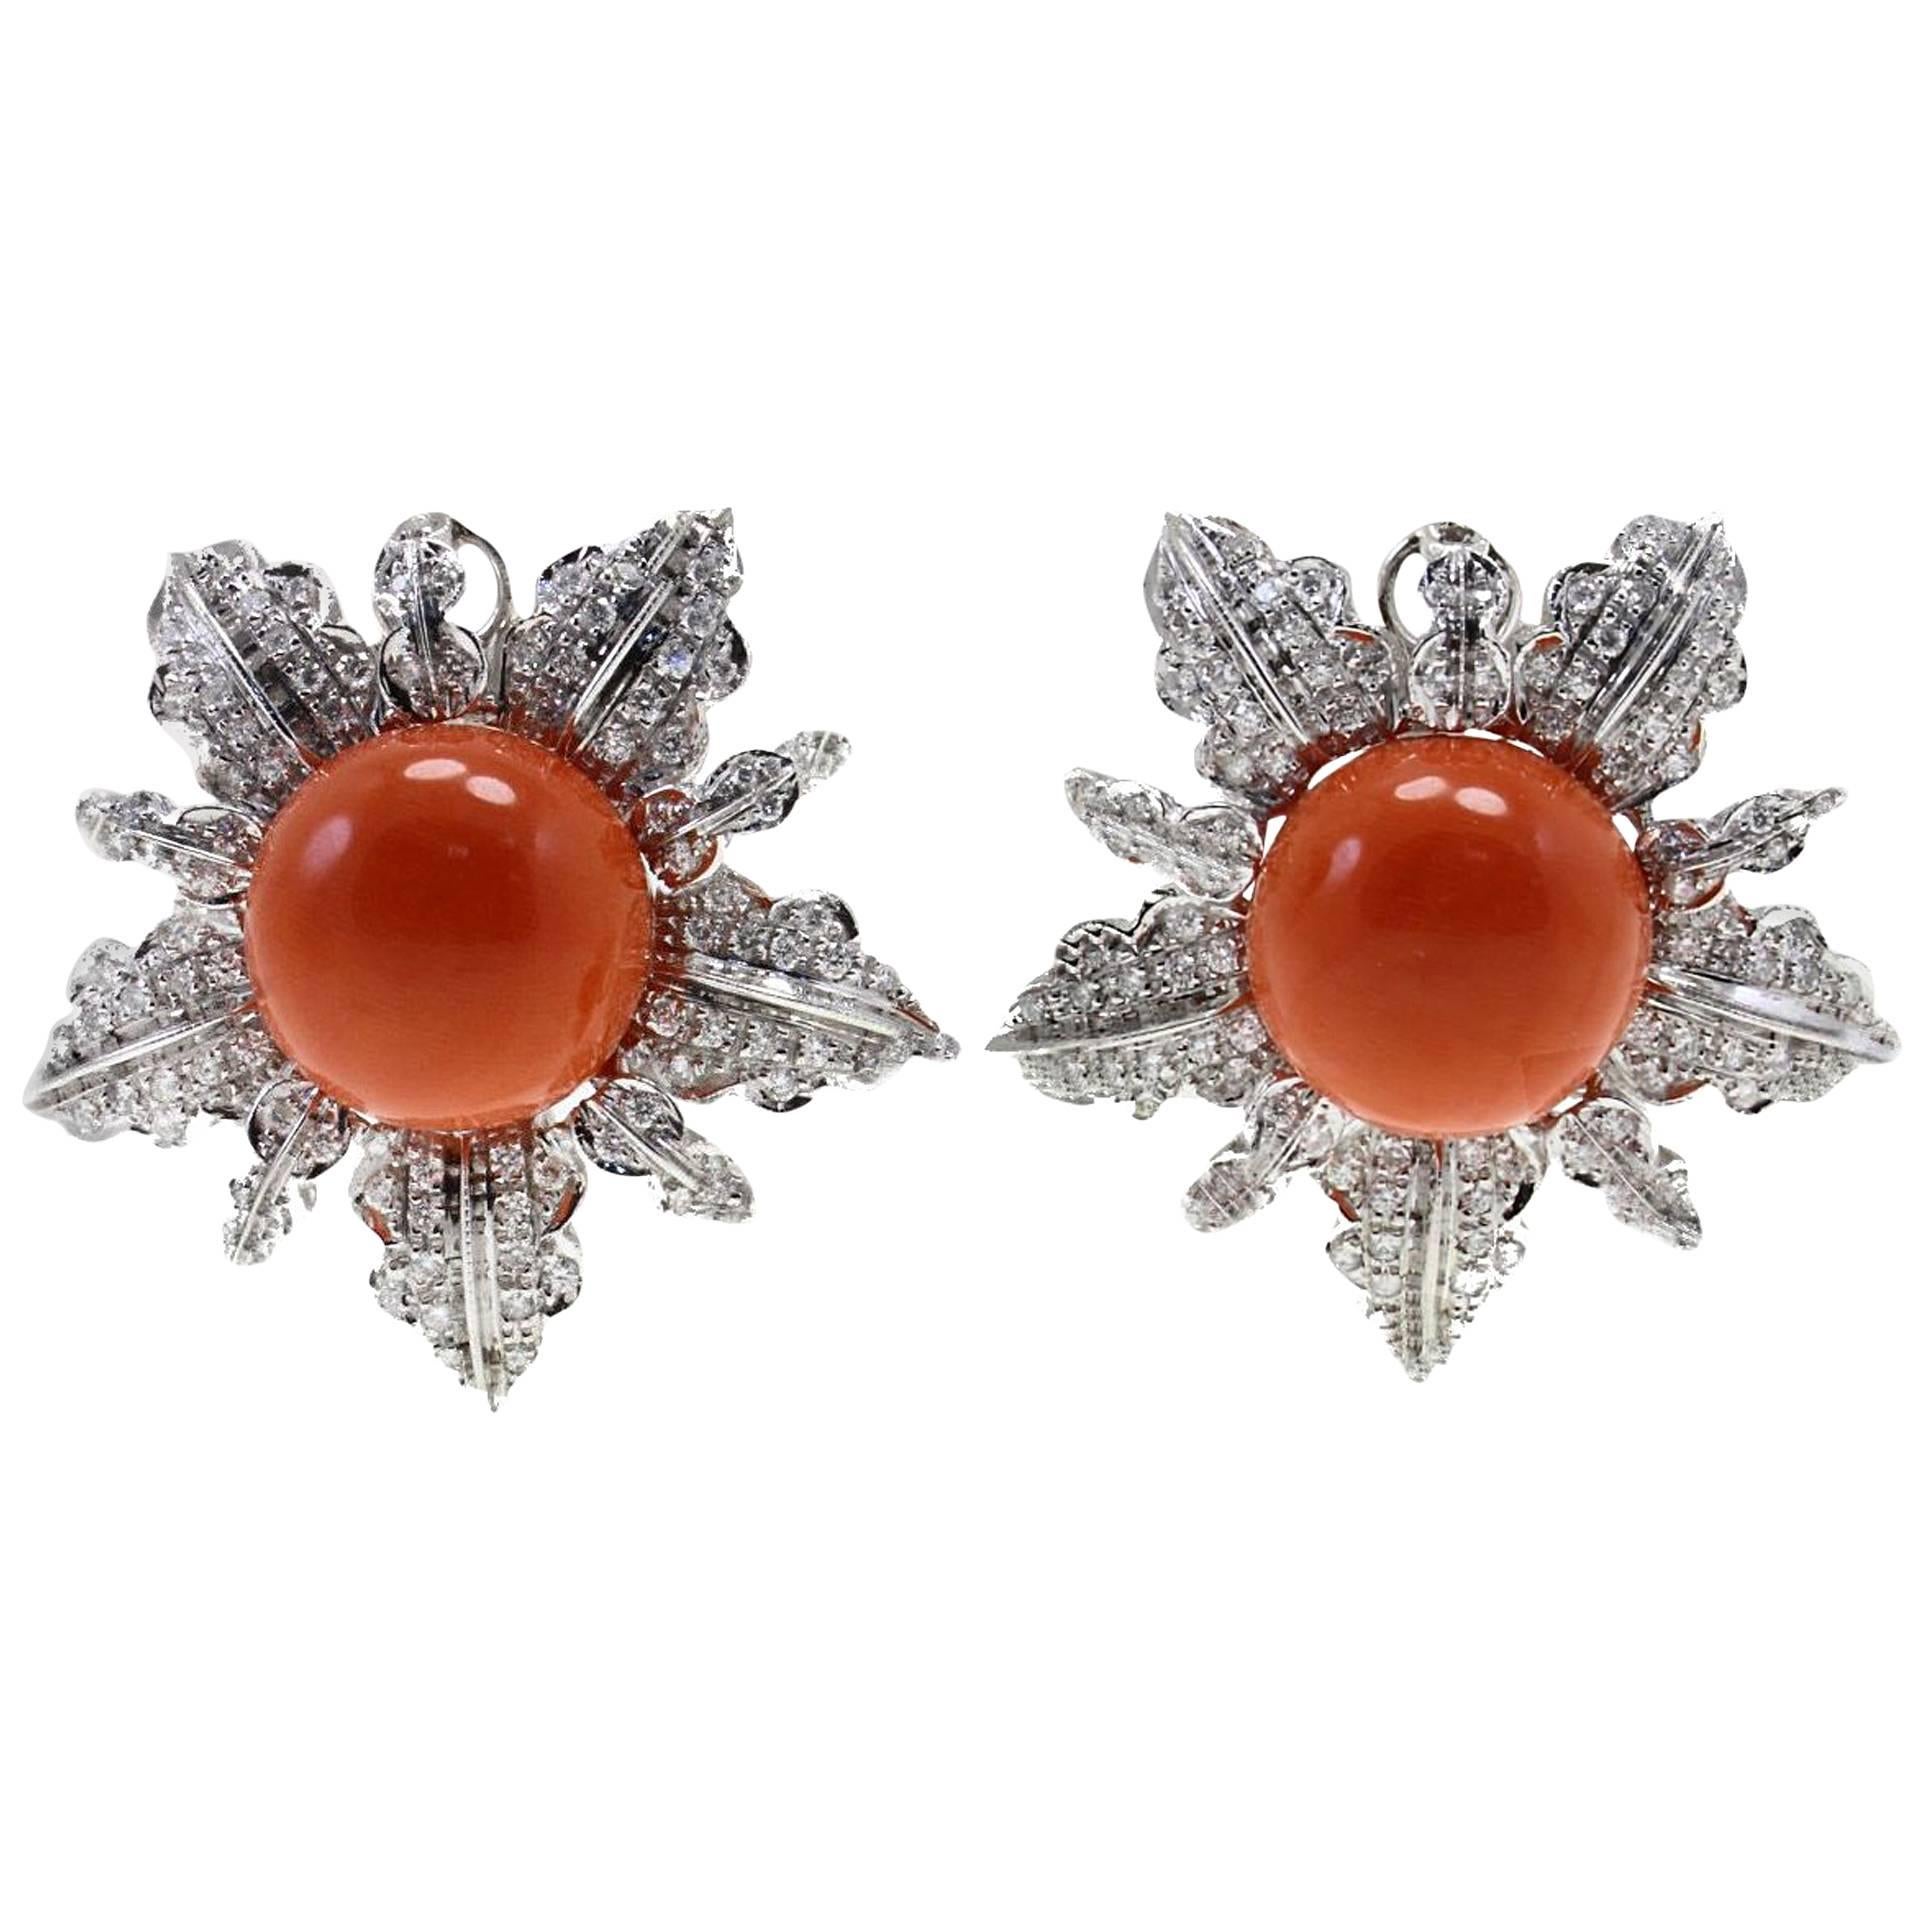 White Diamonds, Red Coral Buttons, 18K White Gold Clip-on Earrings